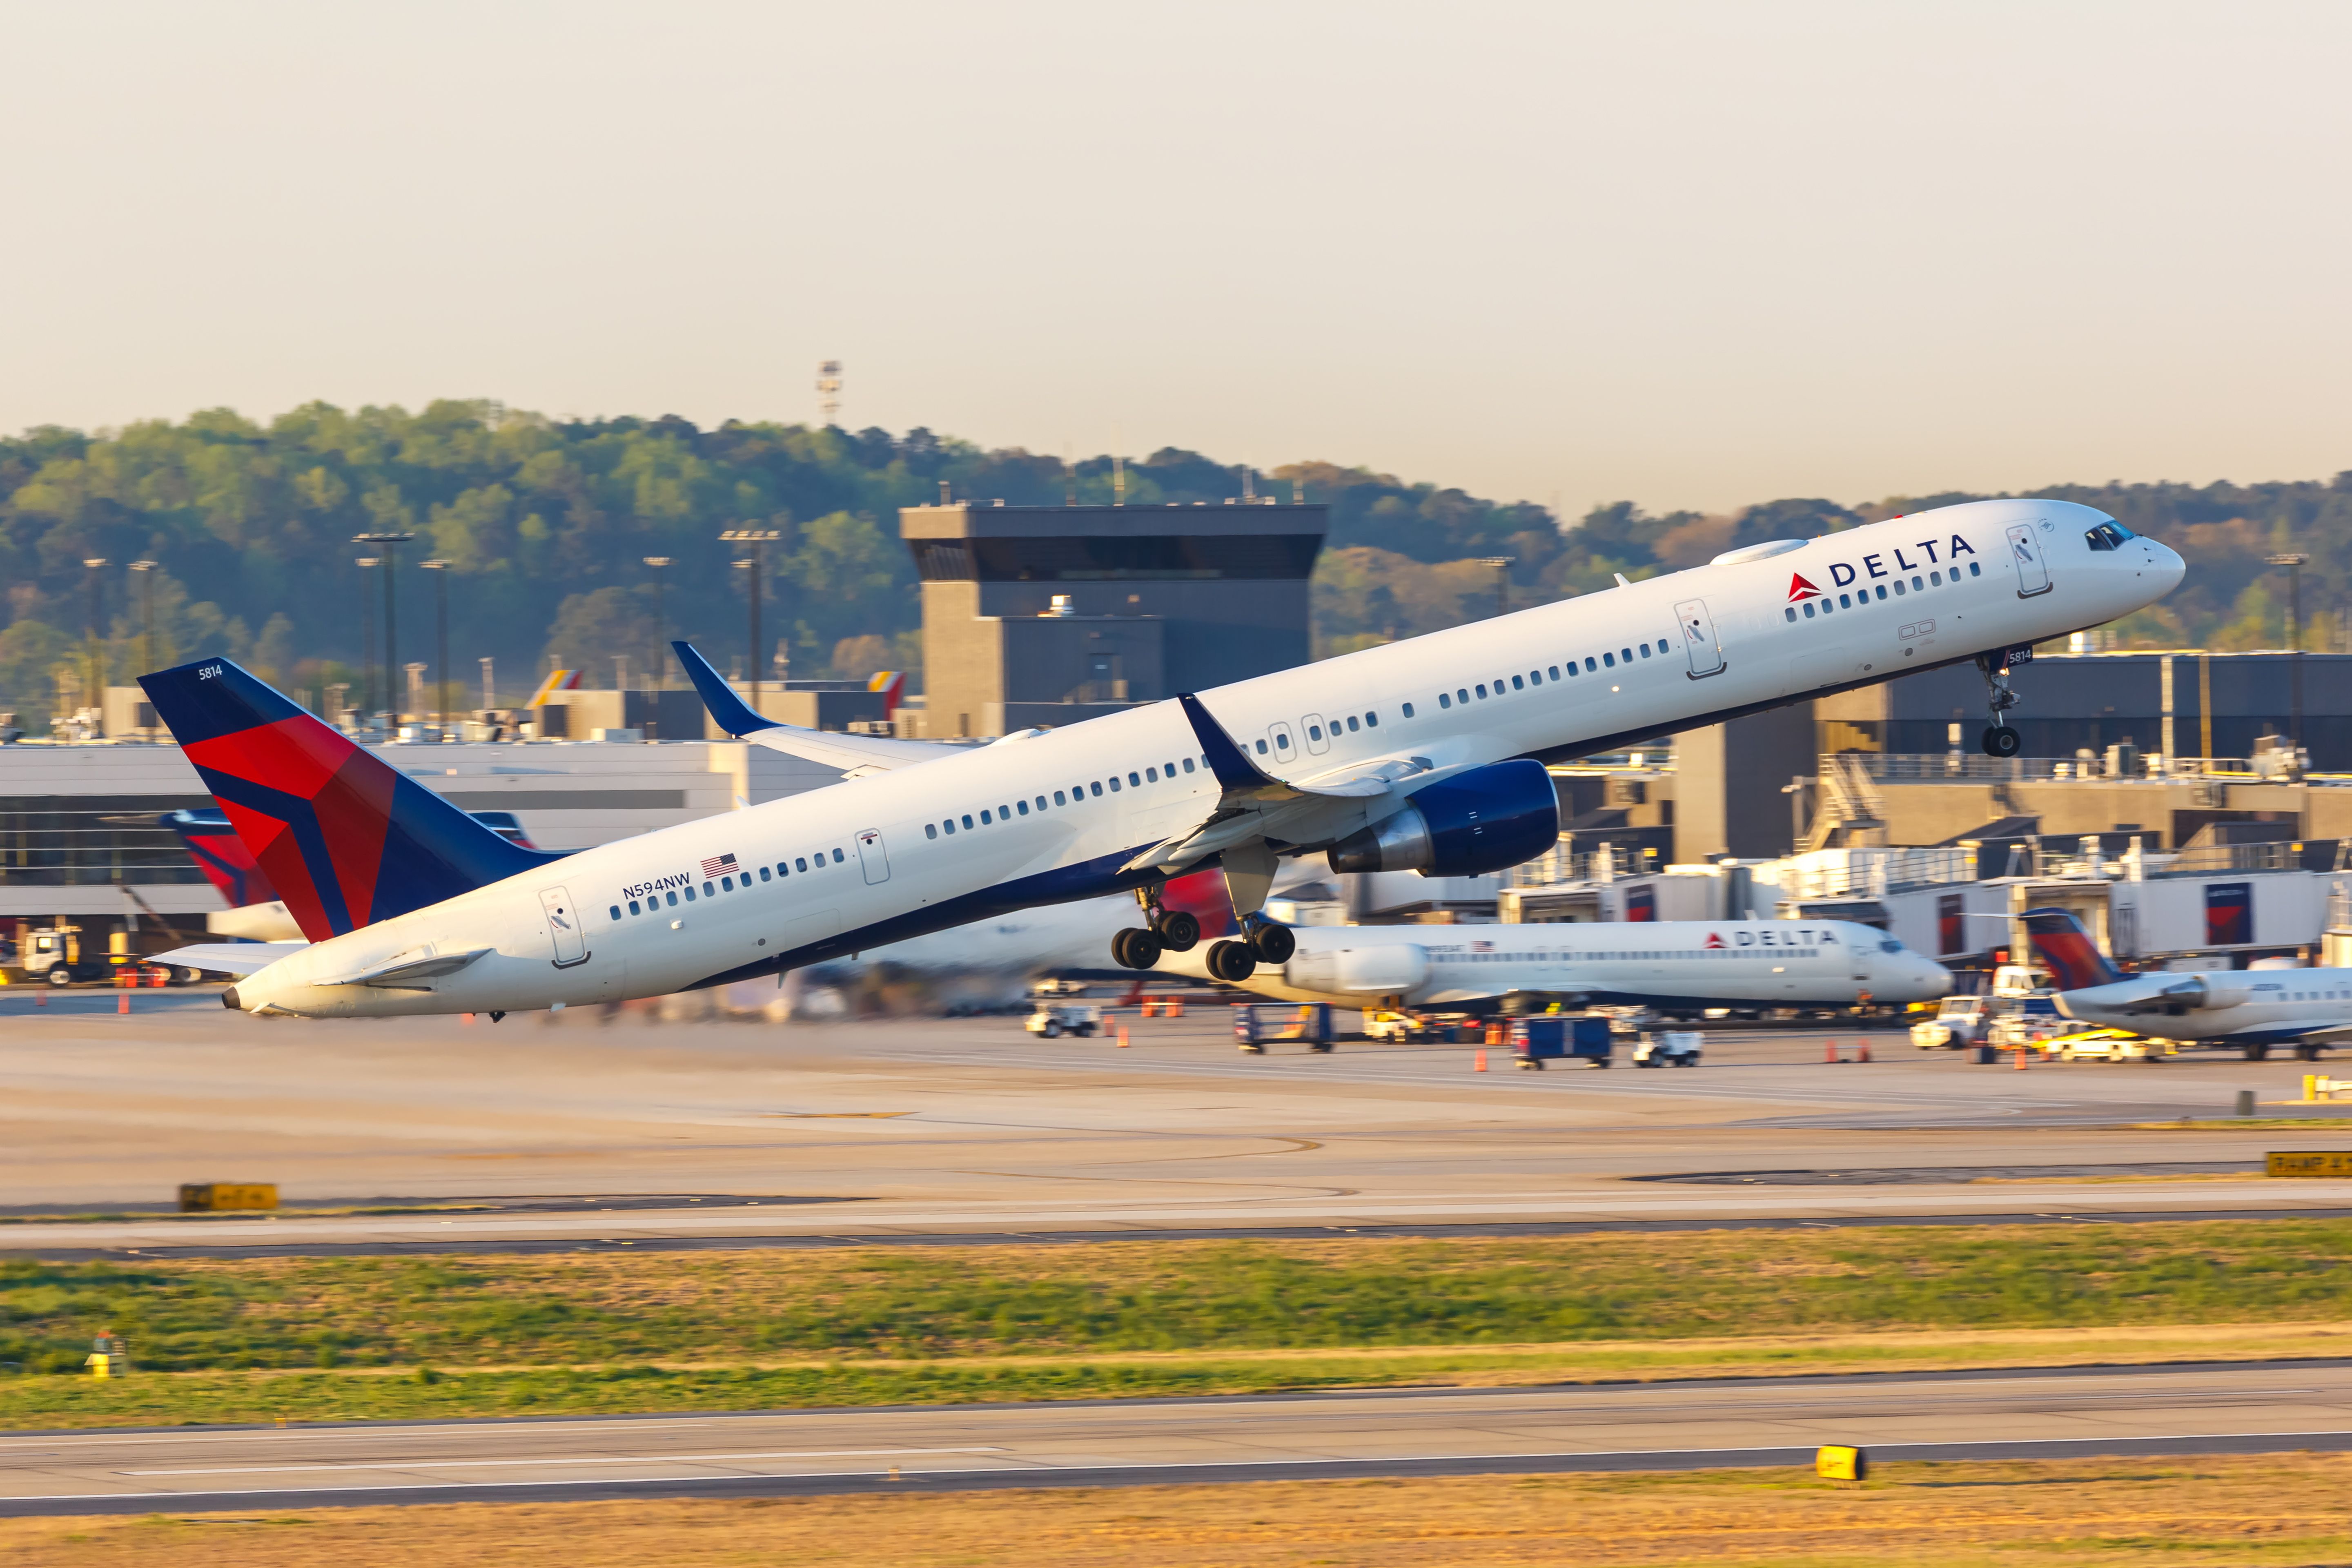 Delta Air Lines Boeing 757-300 taking off